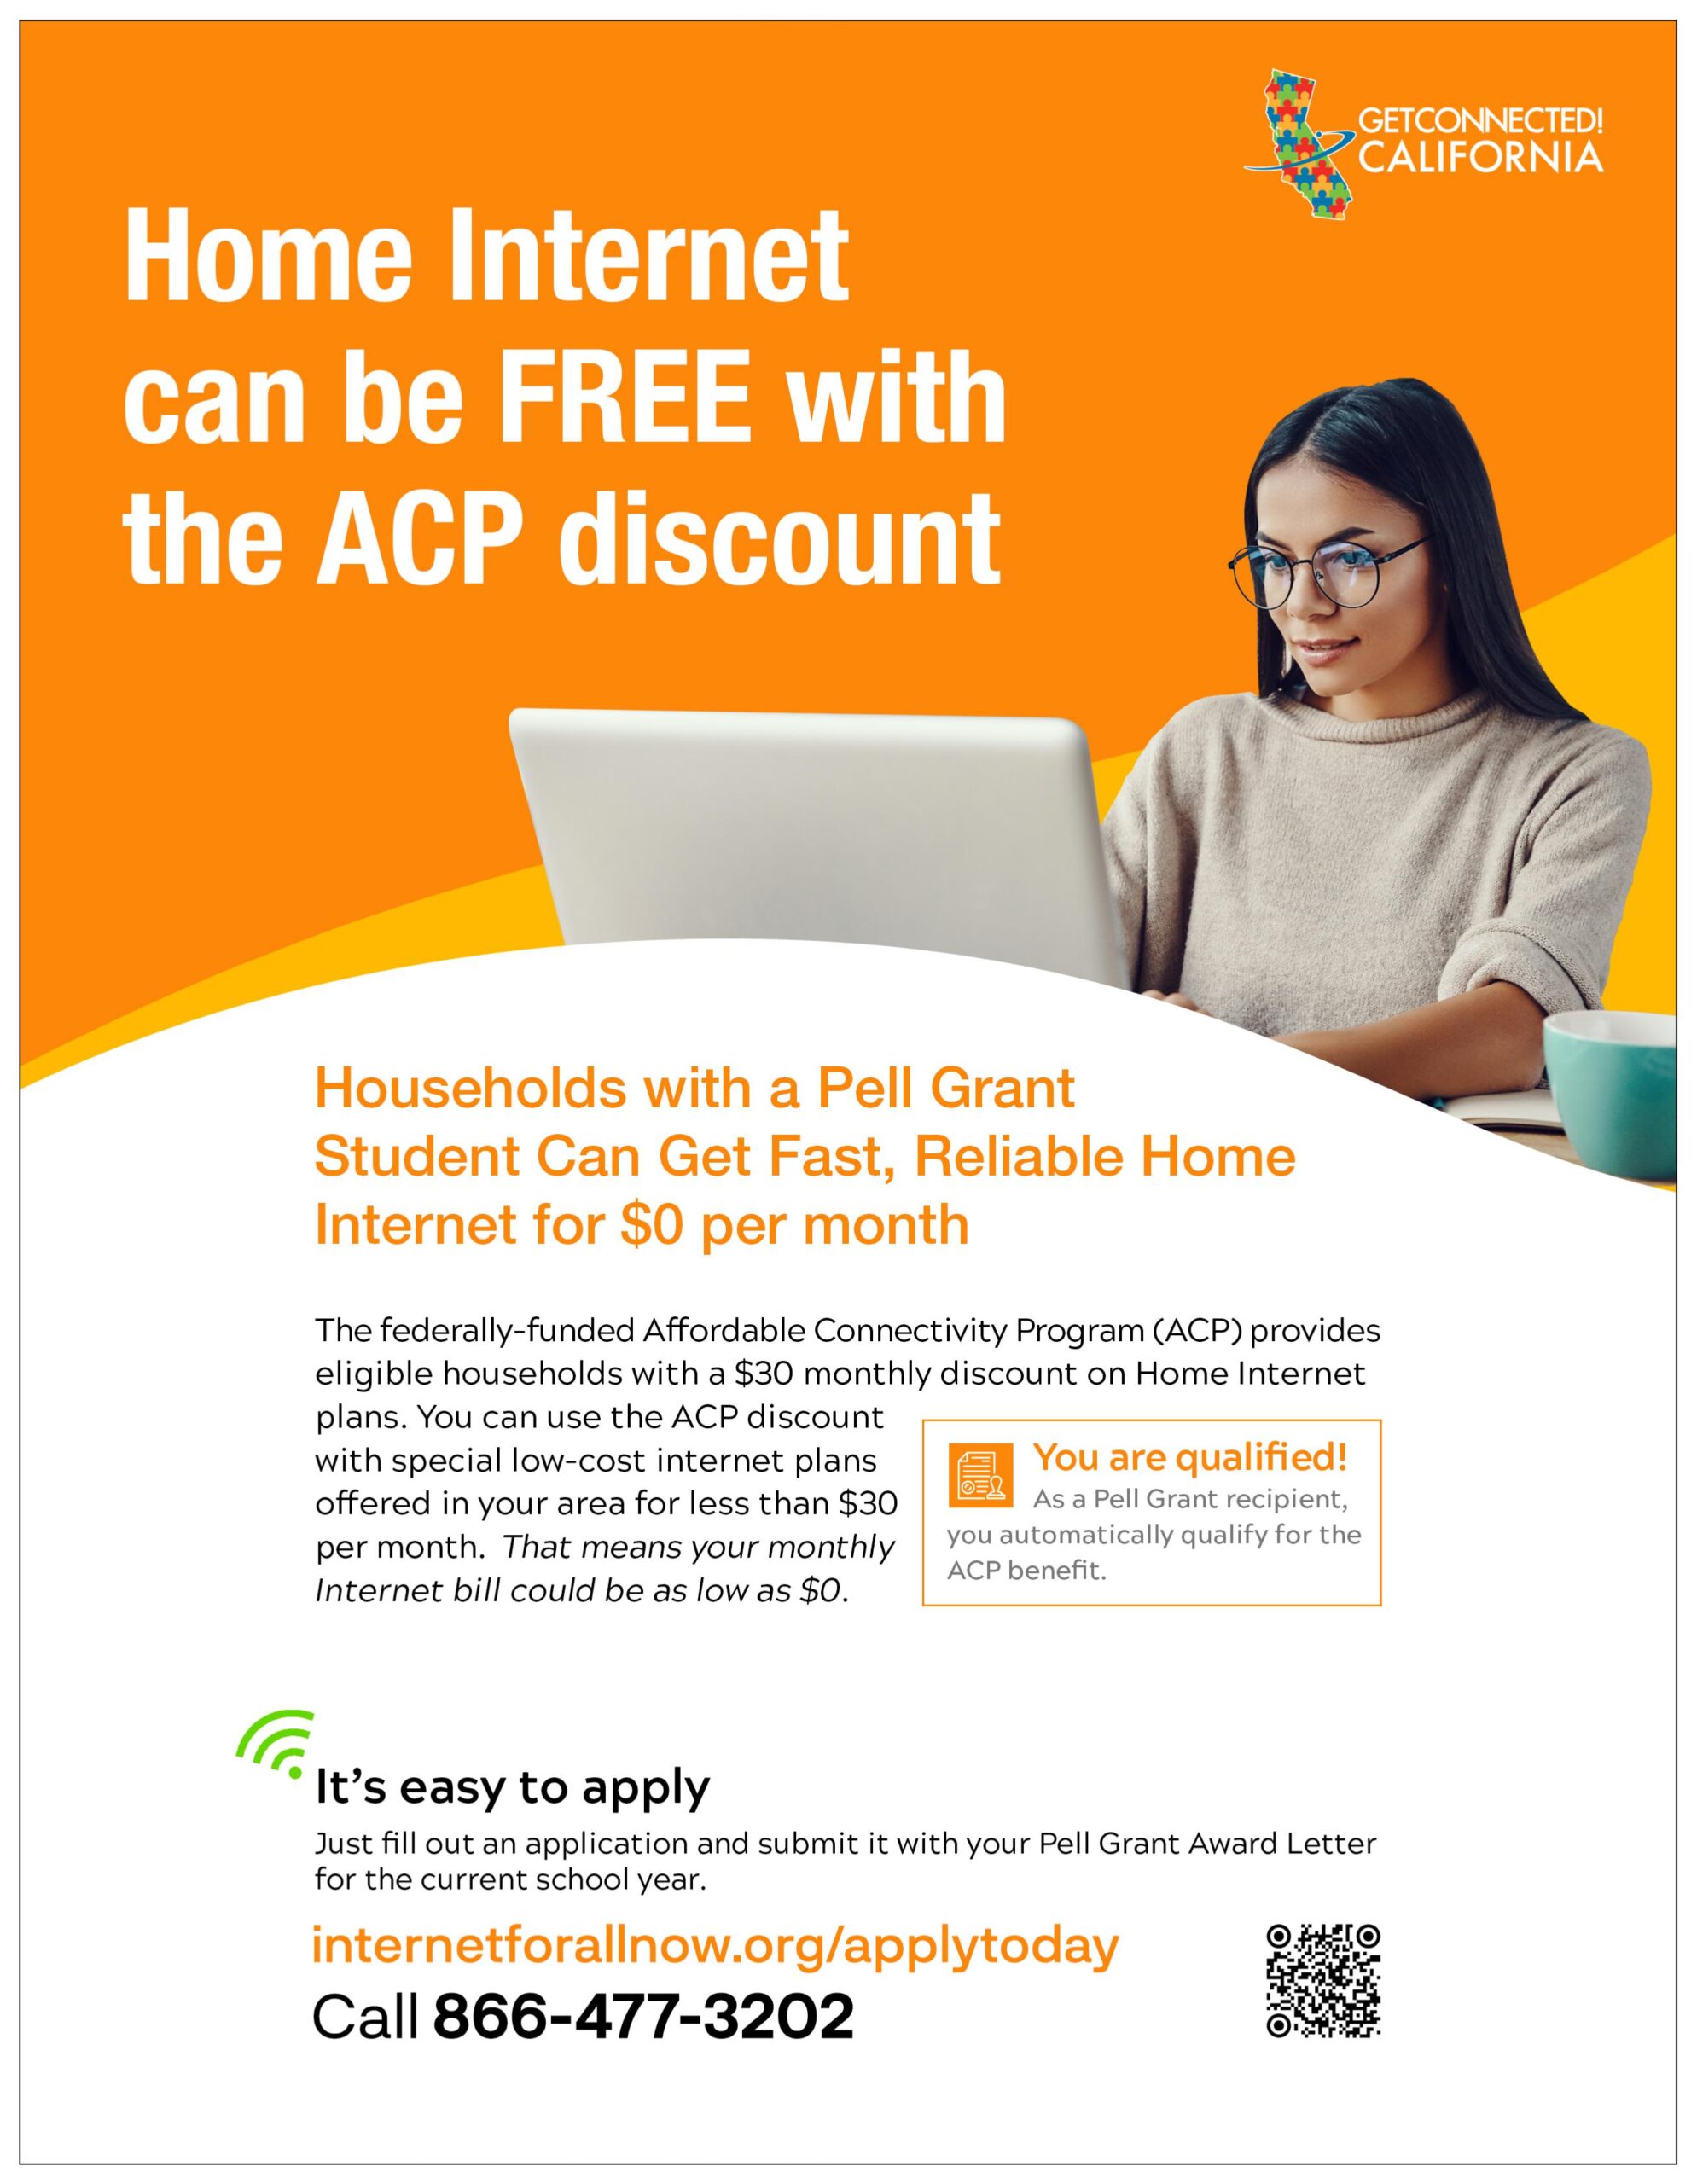 Home Internet can be Free with ACP discount